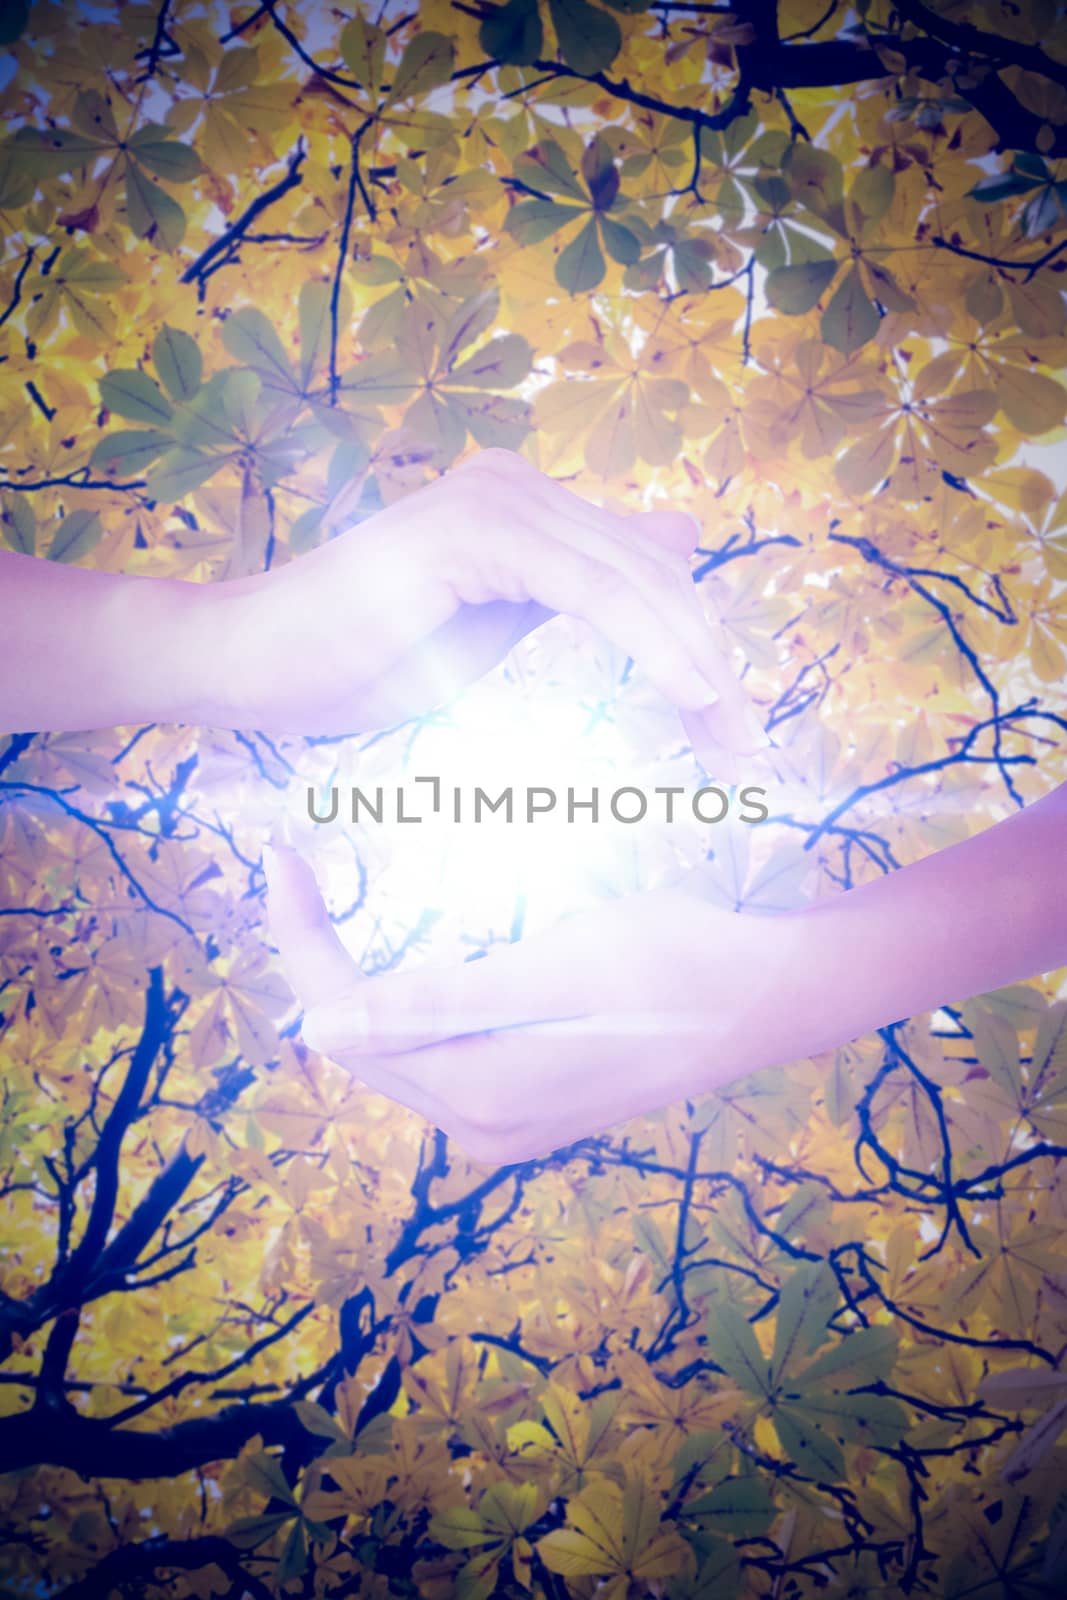 Hands showing against branches and autumnal leaves